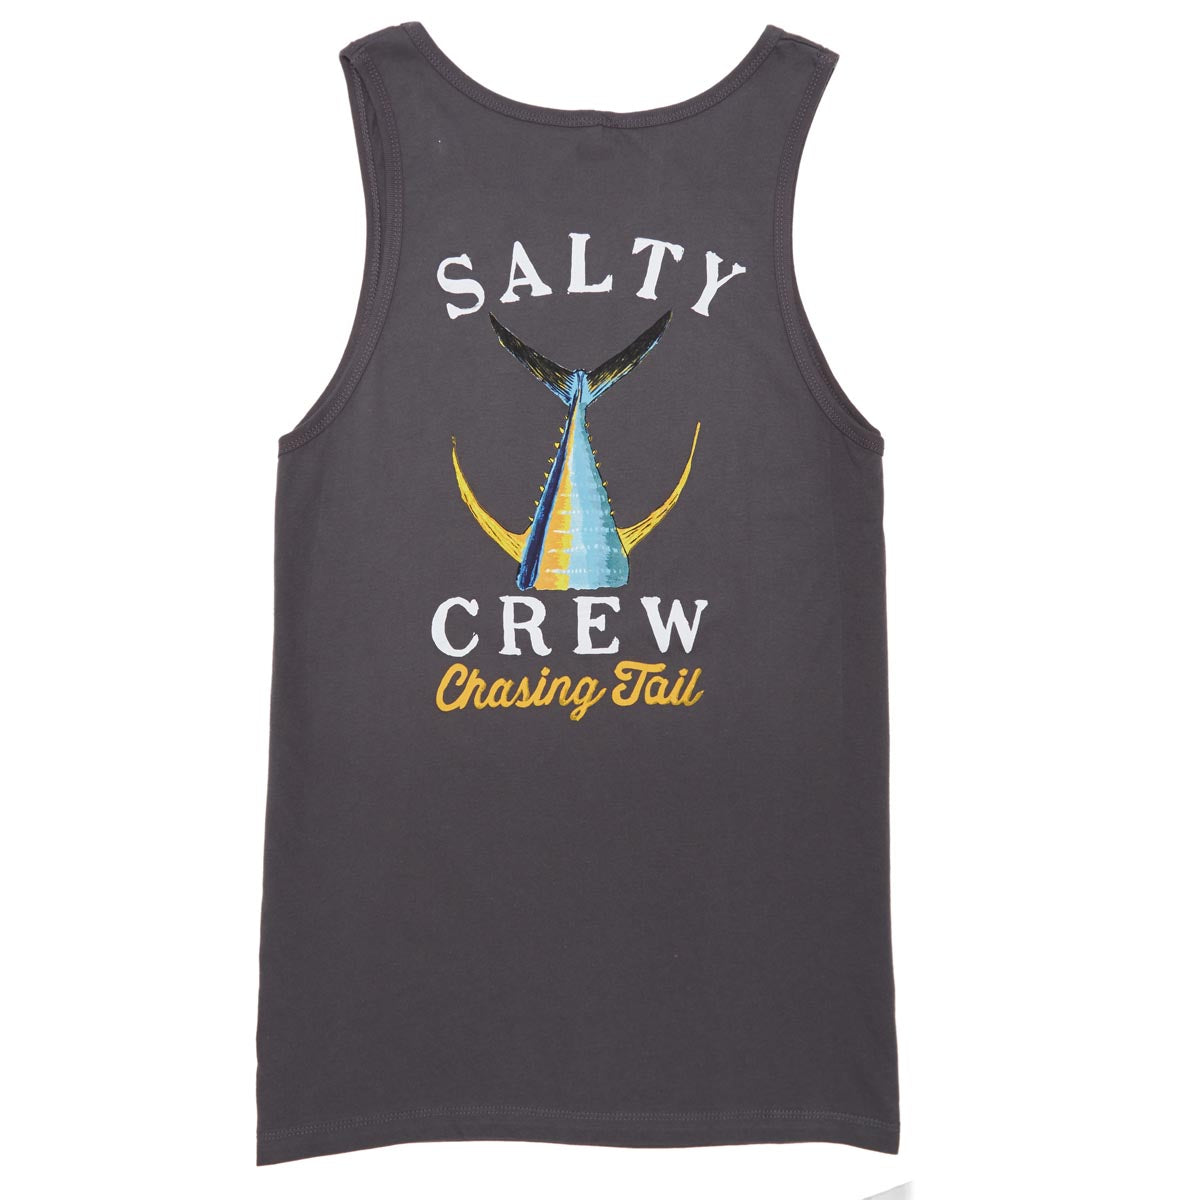 Salty Crew Tailed Tank Top - Charcoal image 1